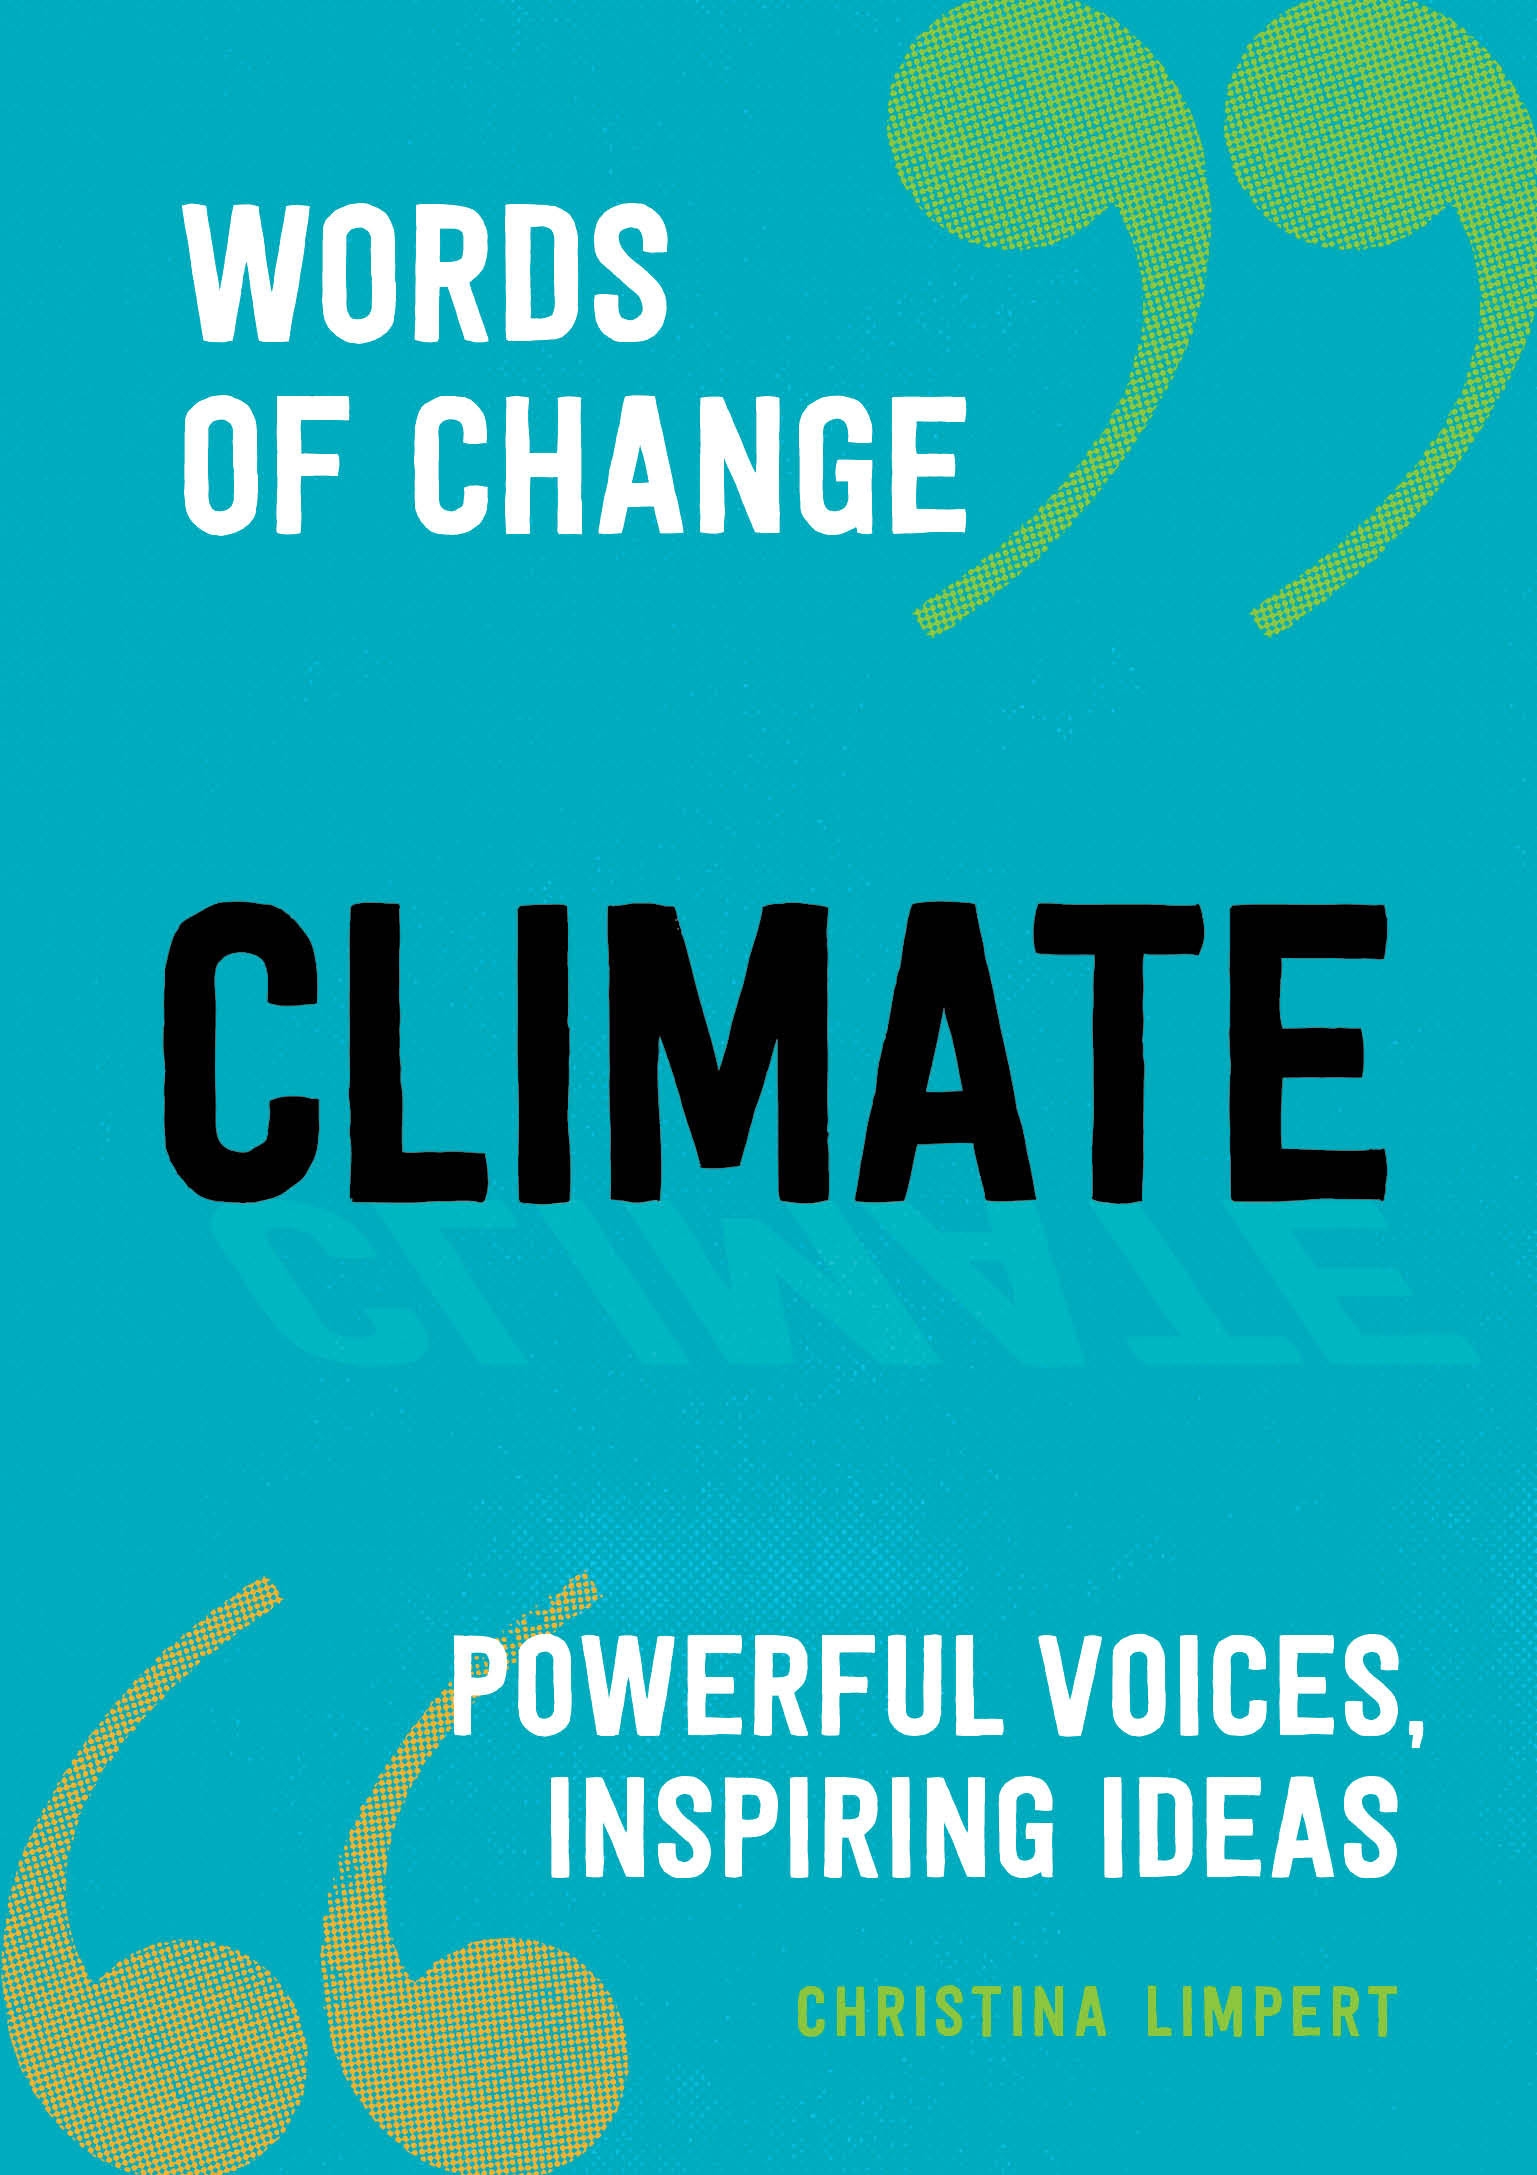 speech on climate change 150 words